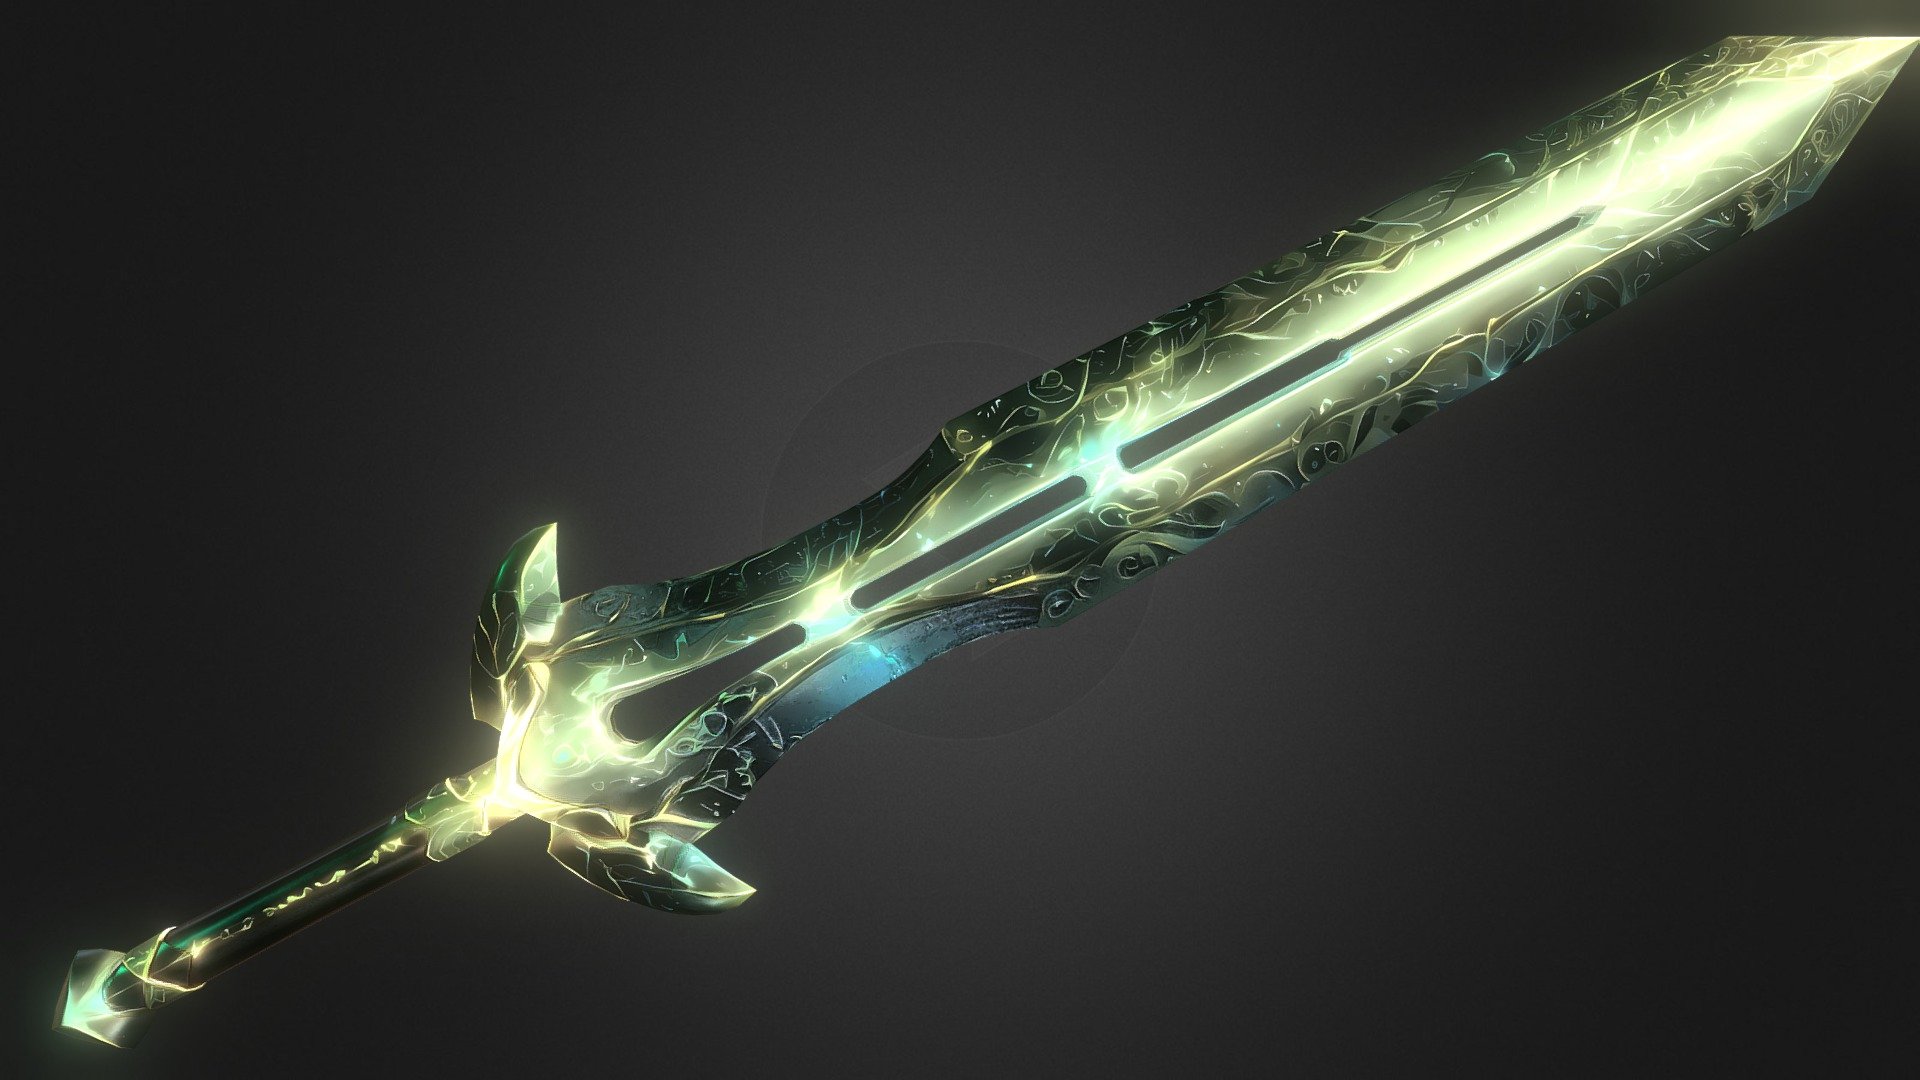 About the model: Aeterskogr, the Eternal Forest Blade, imbued with an ancient spirit, echoing the eternal dance of the forest. The blade gleams with ethereal light, illuminating paths untrodden and realms unseen. Each swing releases an orchestra of whispers that tell tales of timeless battles and victories yet to come. This sword is a symbol of strength, courage, and the eternal spirit of nature.

Name:: Aeterskogr (Eternal Forest Blade) - Merging Latin “Aeternum” (eternal) with Old Norse “skogr” (forest).

Performance: It performs very well in-game, it’s lowpoly and good looking. The textures can be down-scaled from their original 4k resolution to 1k, and it will still have great quality.

Topology: Triangulated

4k Textures: Color, Metallic, Roughness, Emissive, Normal, Height (also mesh maps of Ambient occlusion, Thickness, Curvature, Position, World space normals)

Formats Included: FBX, OBJ, BLEND, GLB, PLY, STL, USDC, X3D, DAE, ABC, MTL, DXF, 3DS - Sword Aeterskogr - Buy Royalty Free 3D model by Wrotzal 3d model